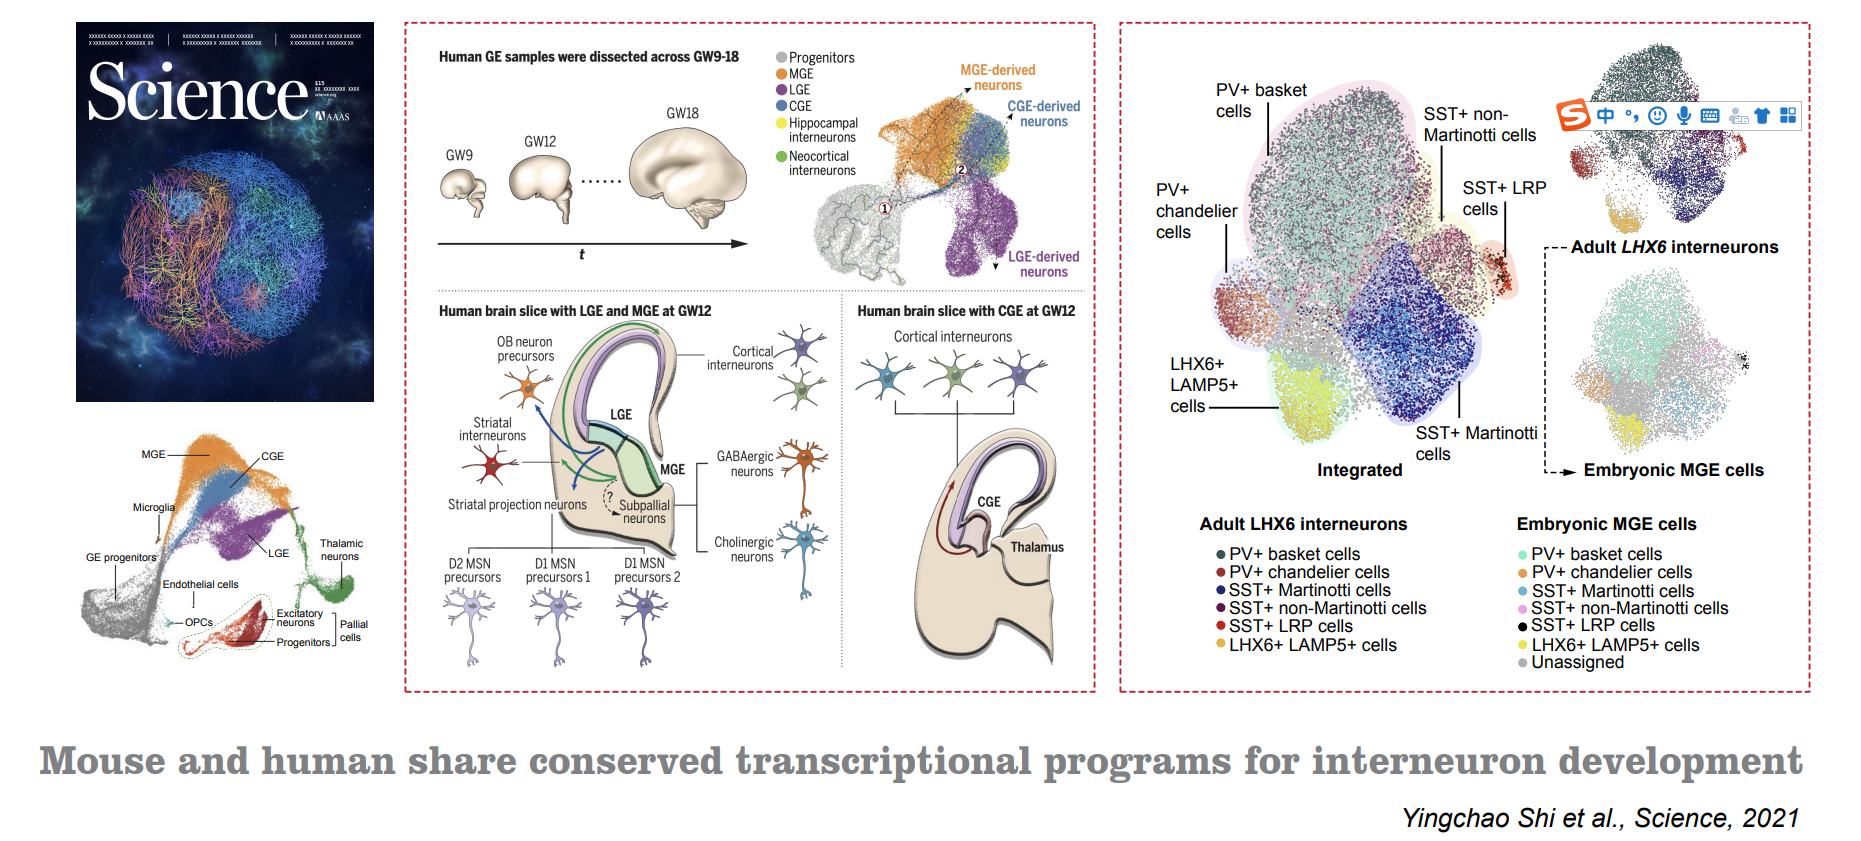 Mouse and human share conserved transcriptional programs for interneuron development